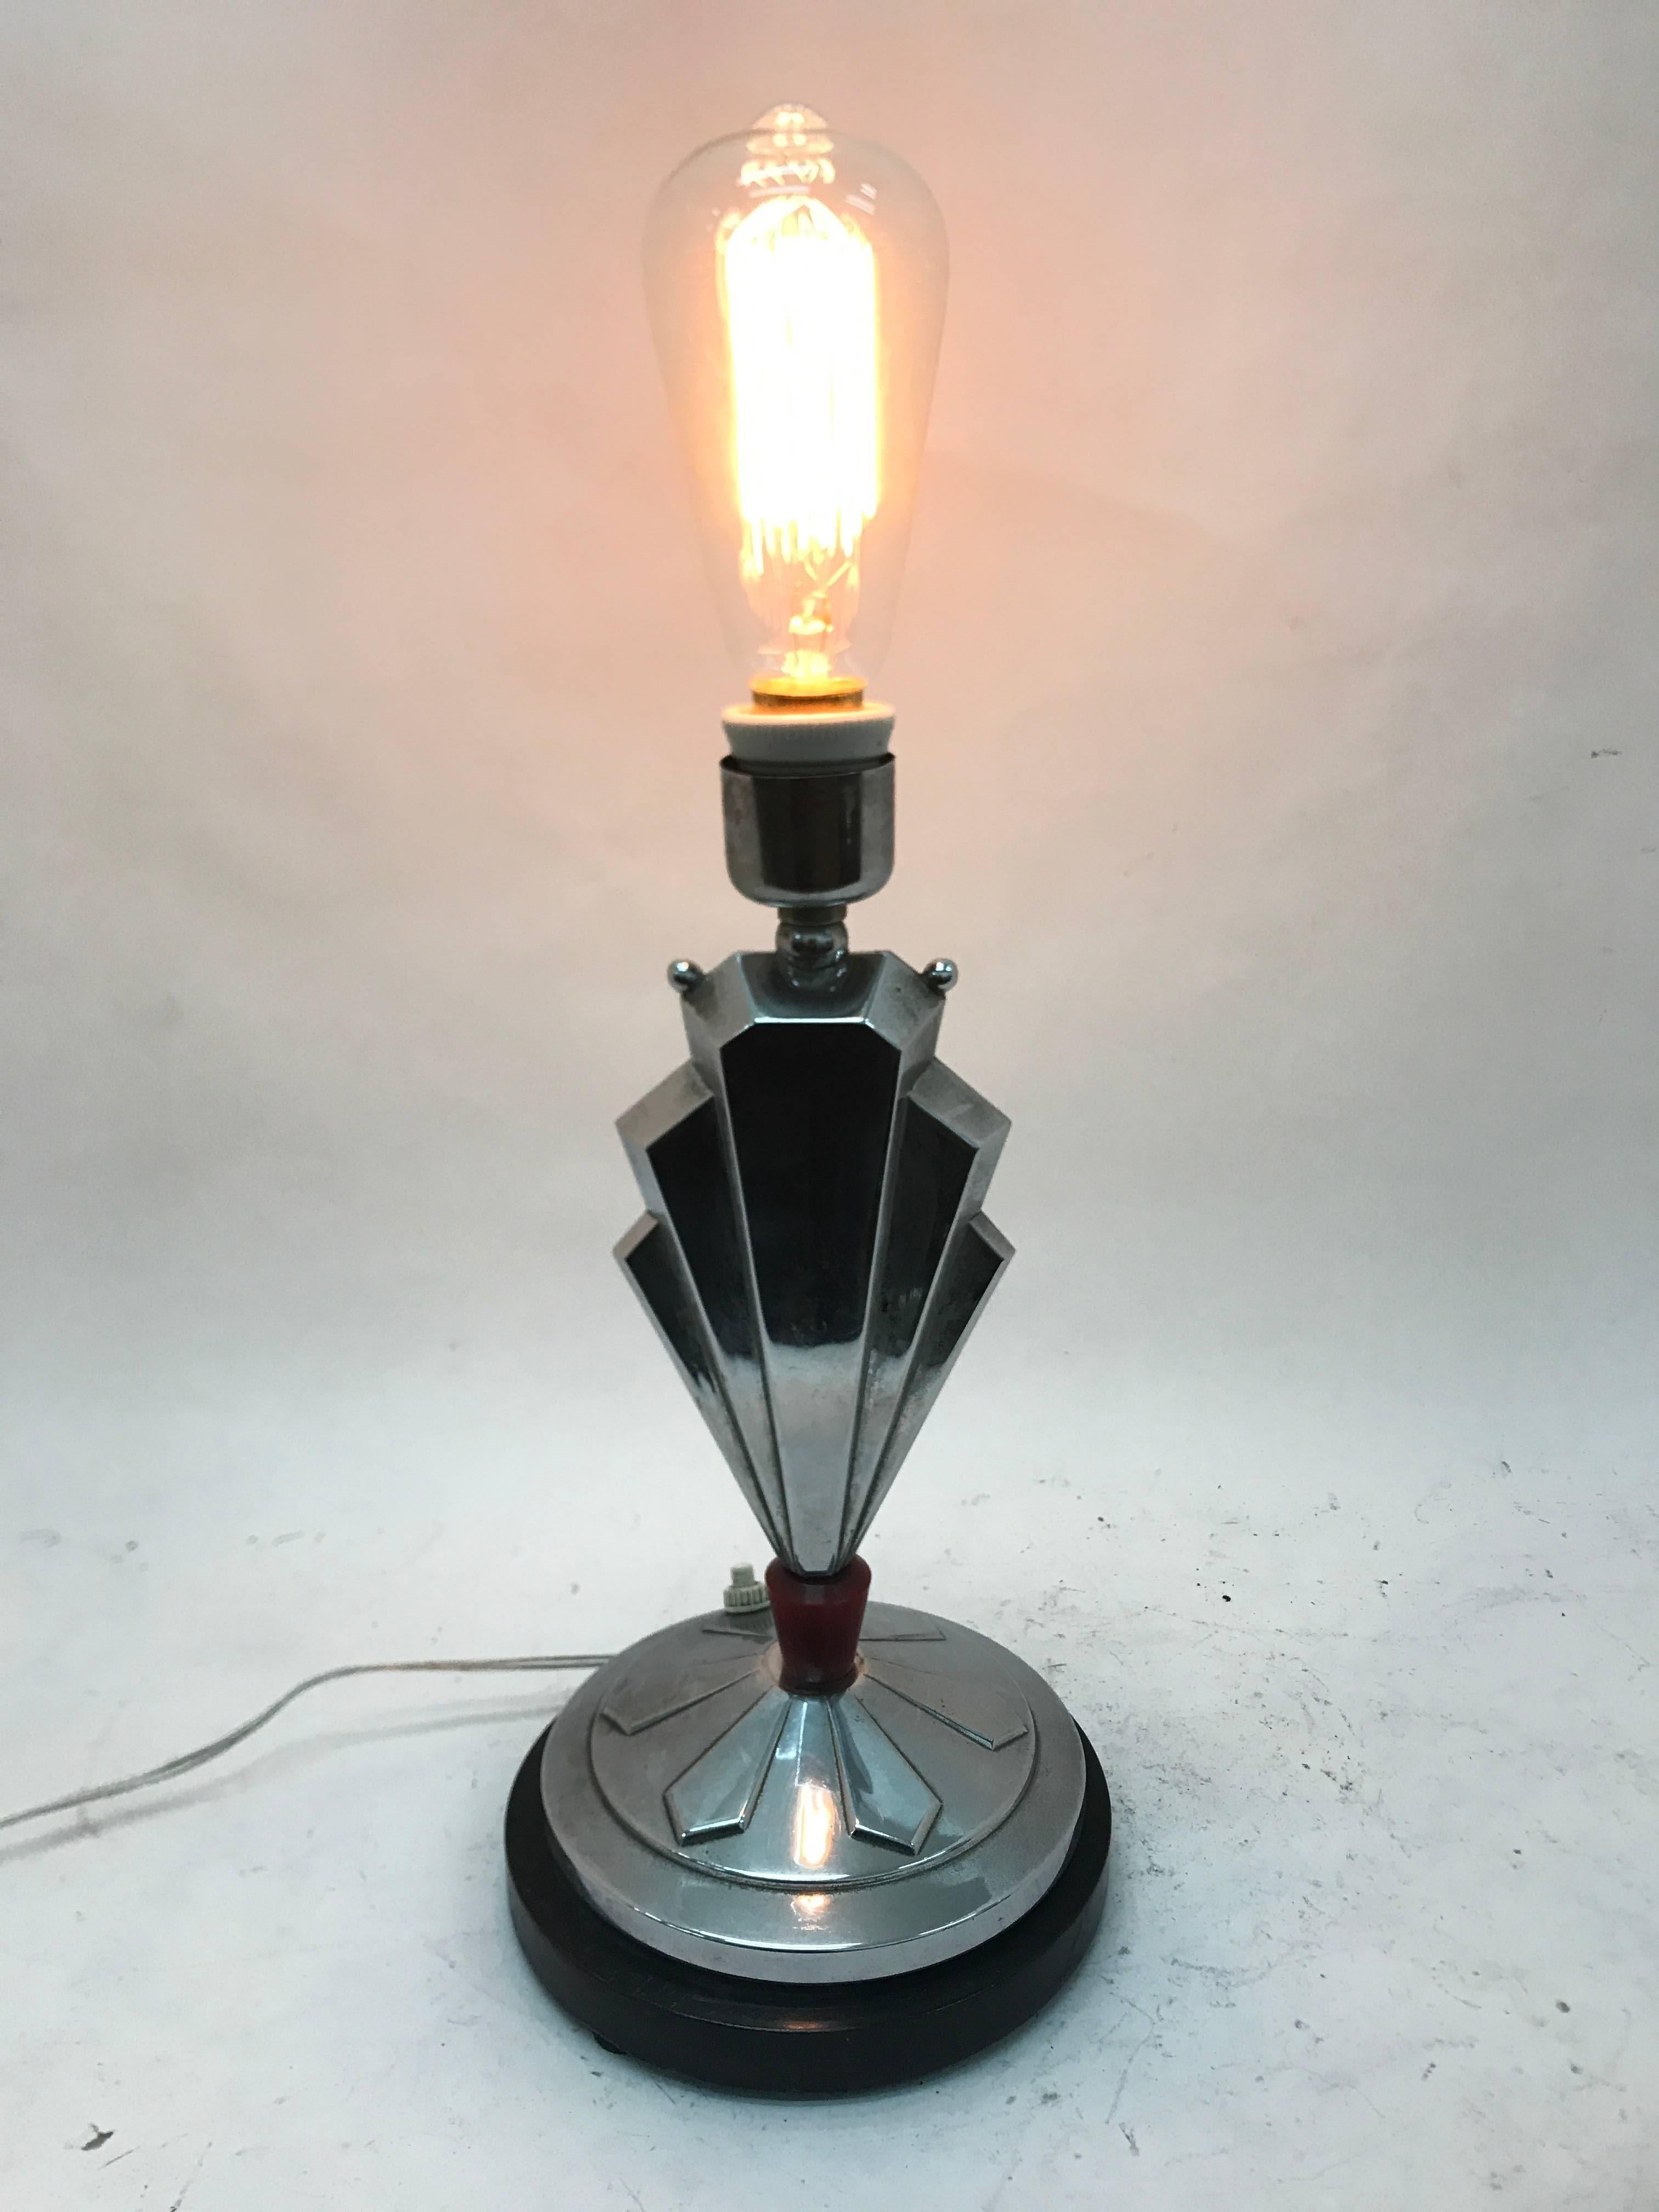 Art Deco table lamp made in Italy in 1920, wood base, chrome and bakelite, in good conditions and in perfect working order.